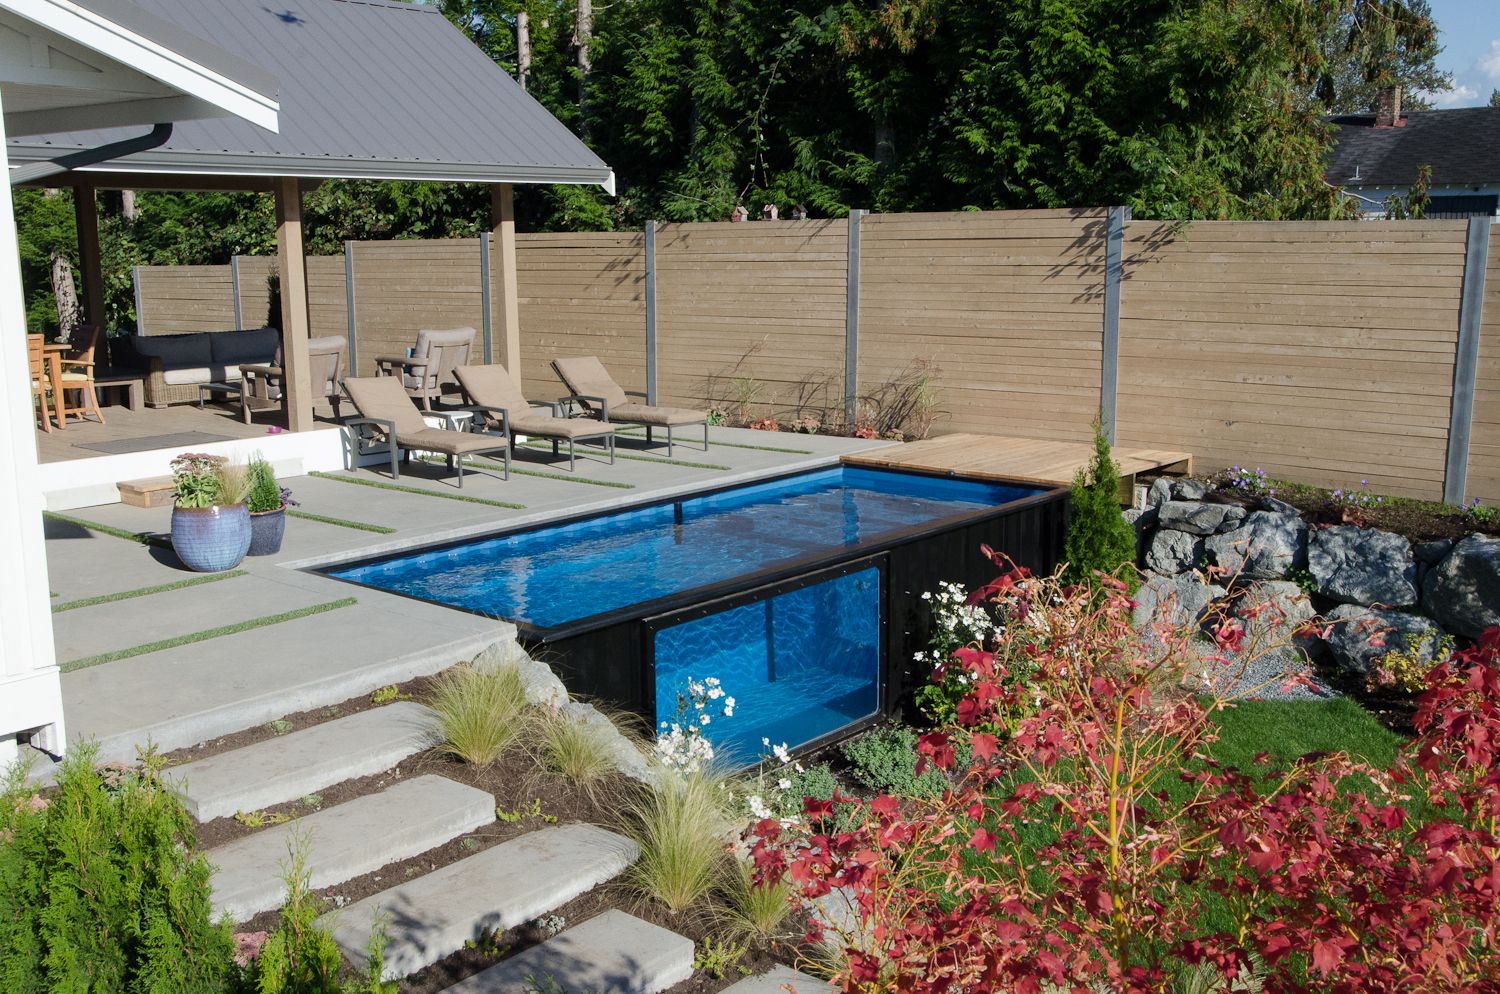 10 Inexpensive Above Ground Pool Landscaping Ideas That Will Transform ...